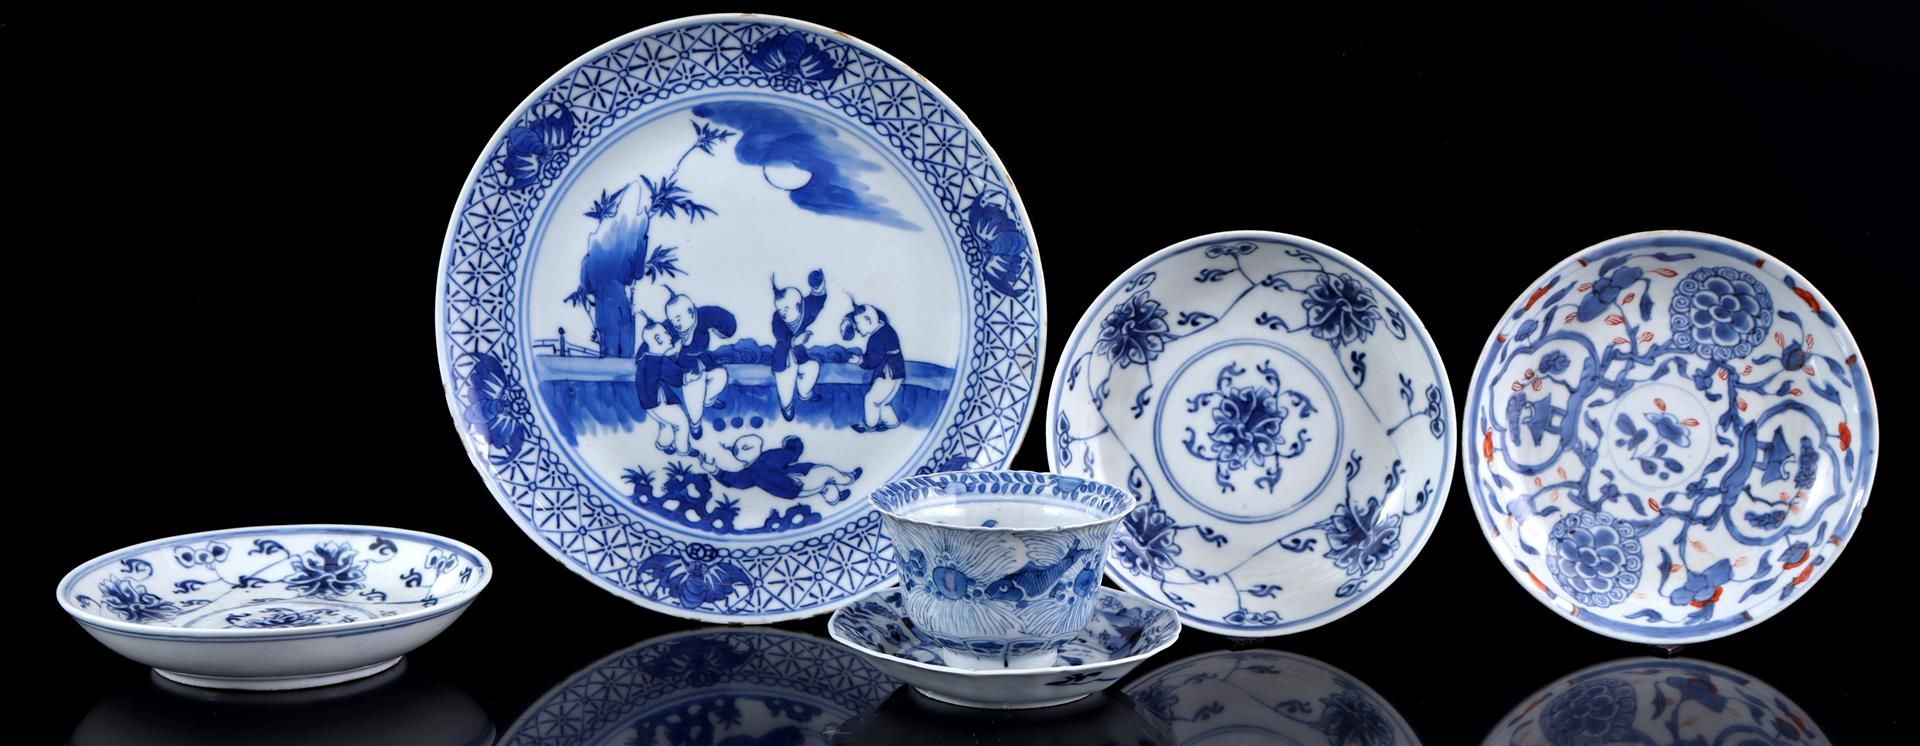 Lot of Japanese and Chinese porcelain from the 18th century